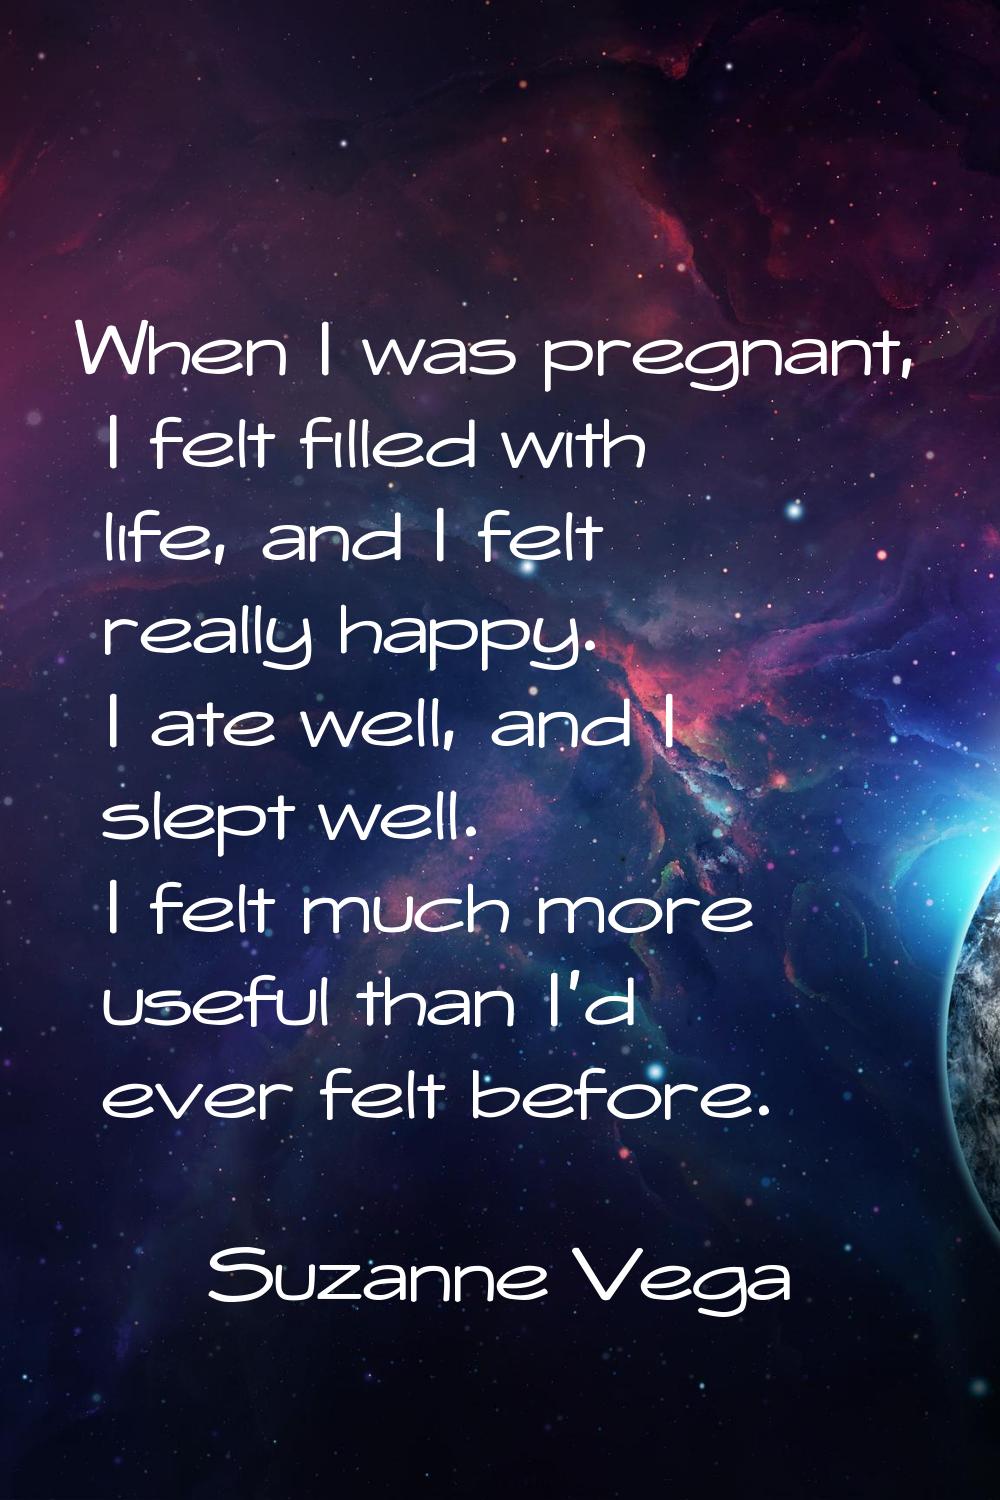 When I was pregnant, I felt filled with life, and I felt really happy. I ate well, and I slept well